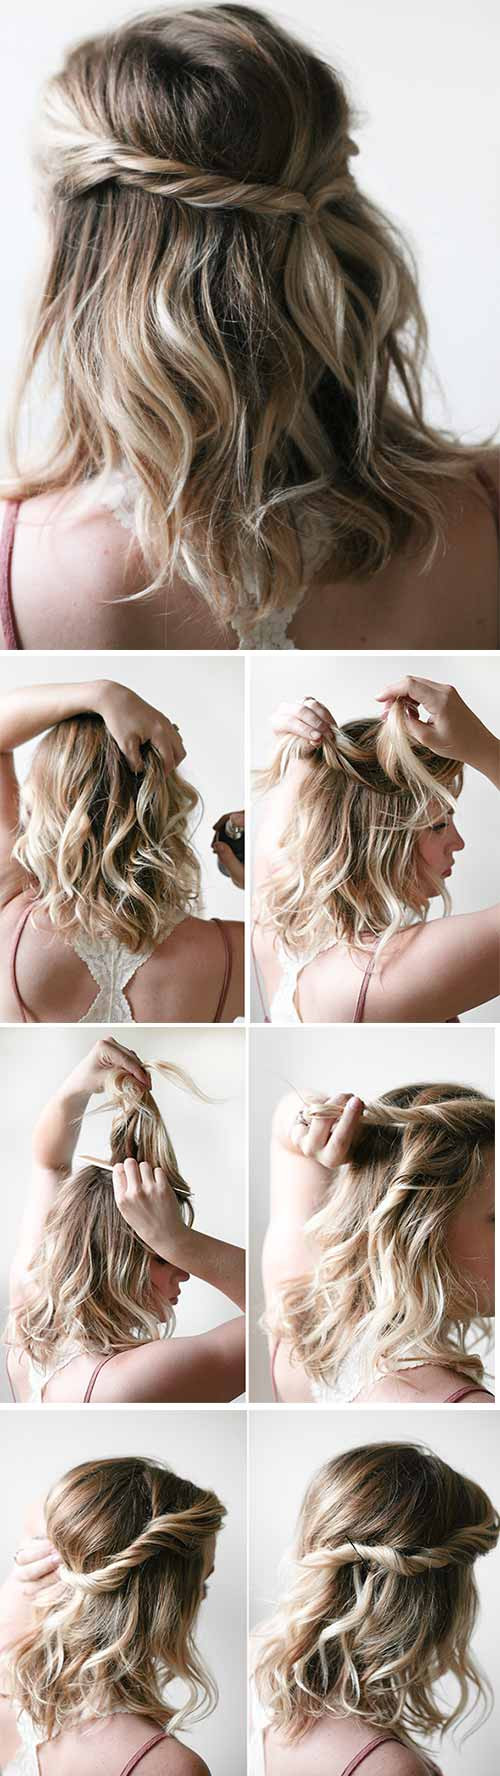 DIY Hairstyle For Short Hair
 20 Incredible DIY Short Hairstyles A Step By Step Guide